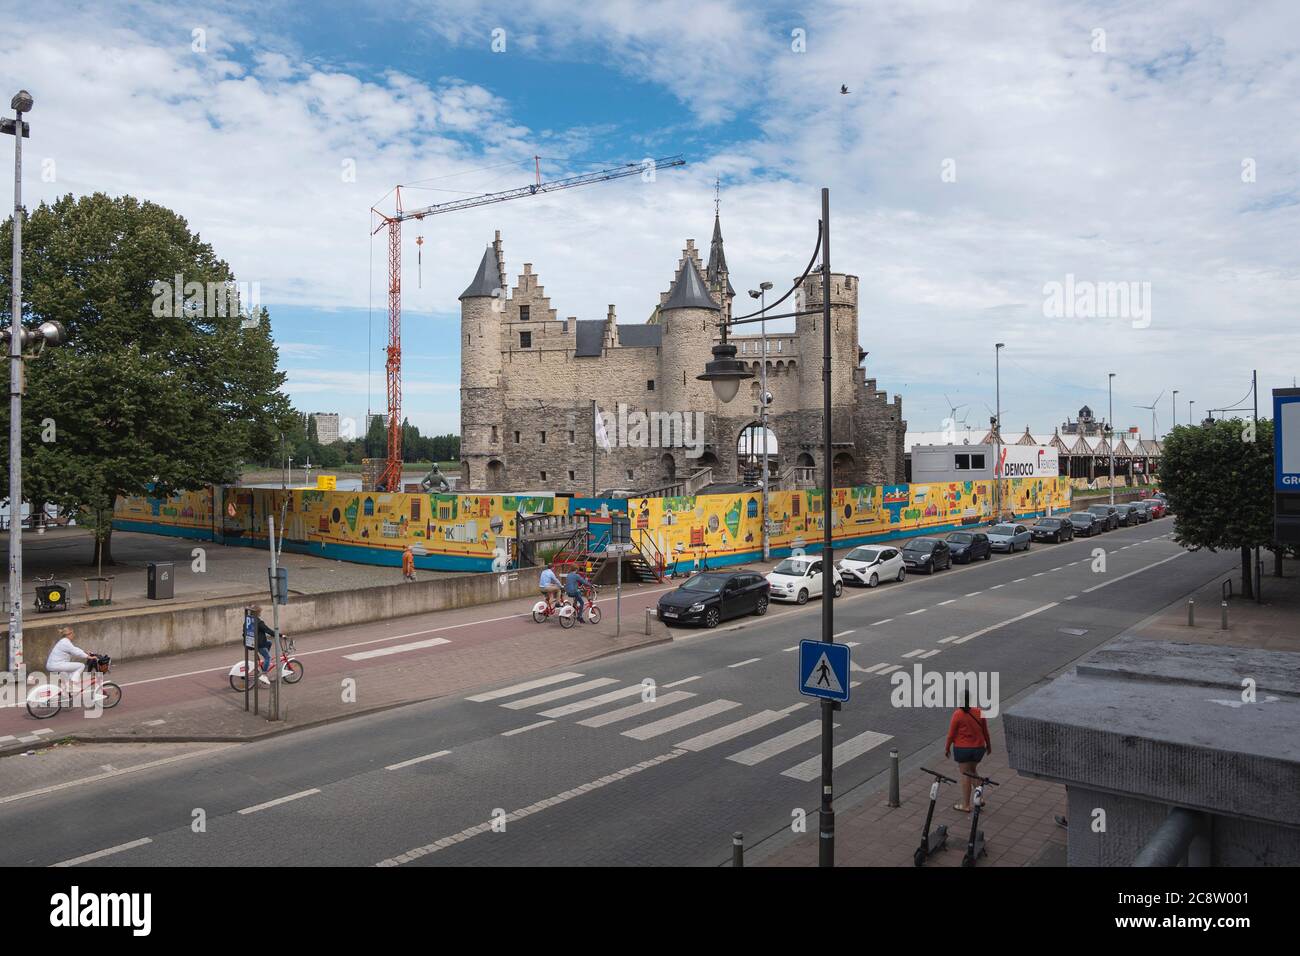 Antwerp, Belgium, July 19, 2020, overview of the restoration and renovation work on the Steen castle in Antwerp Stock Photo